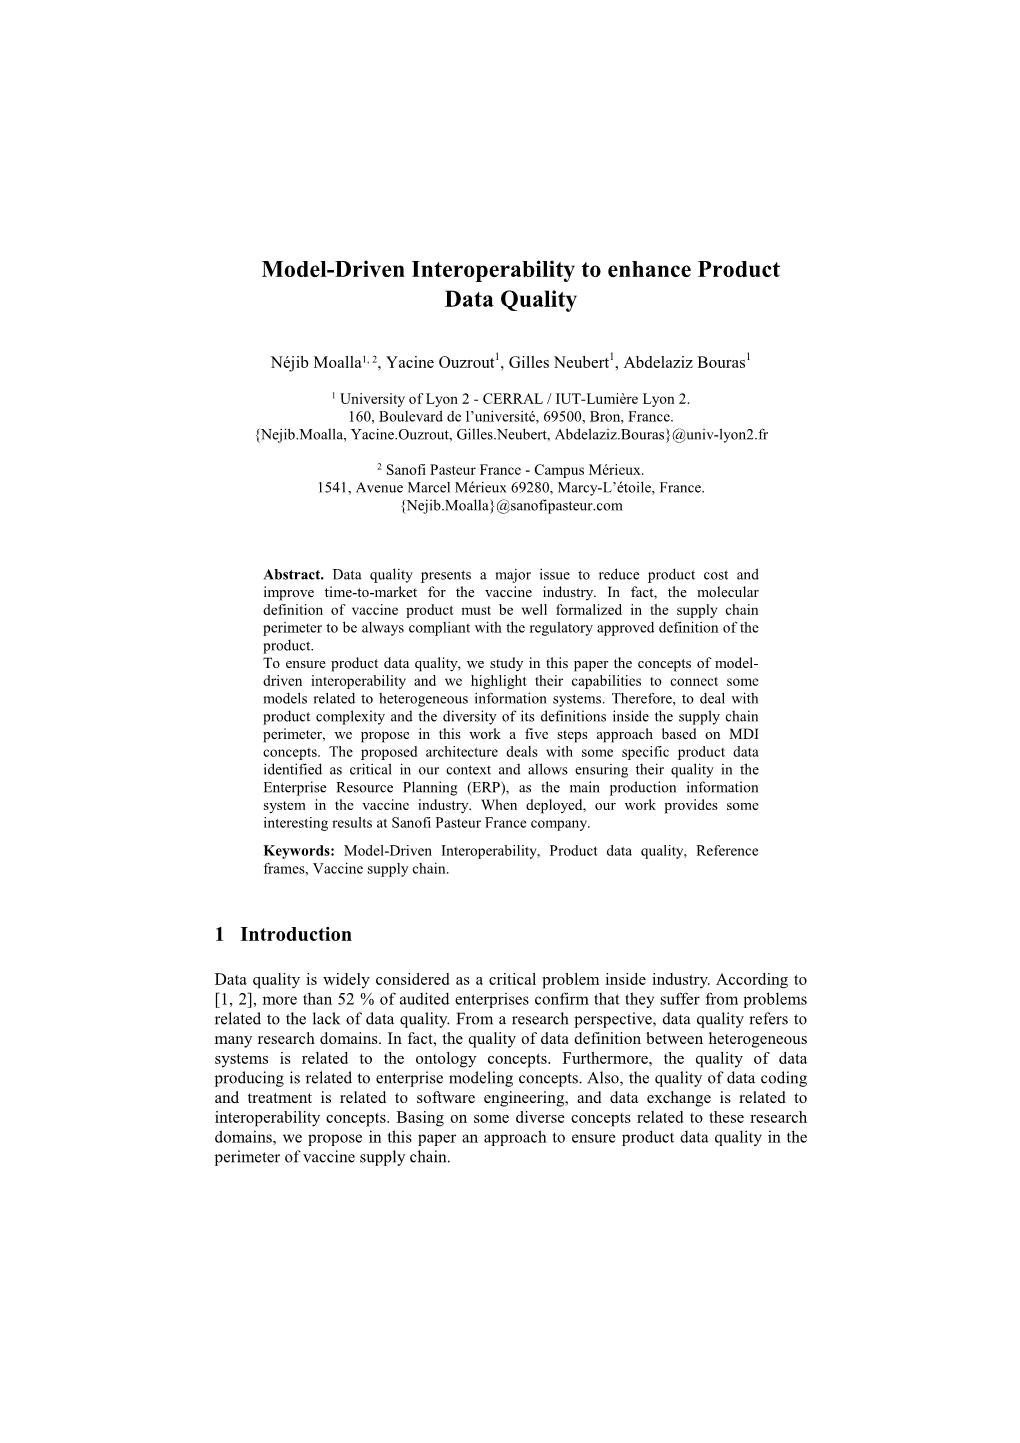 Model-Driven Interoperability to Enhance Product Data Quality